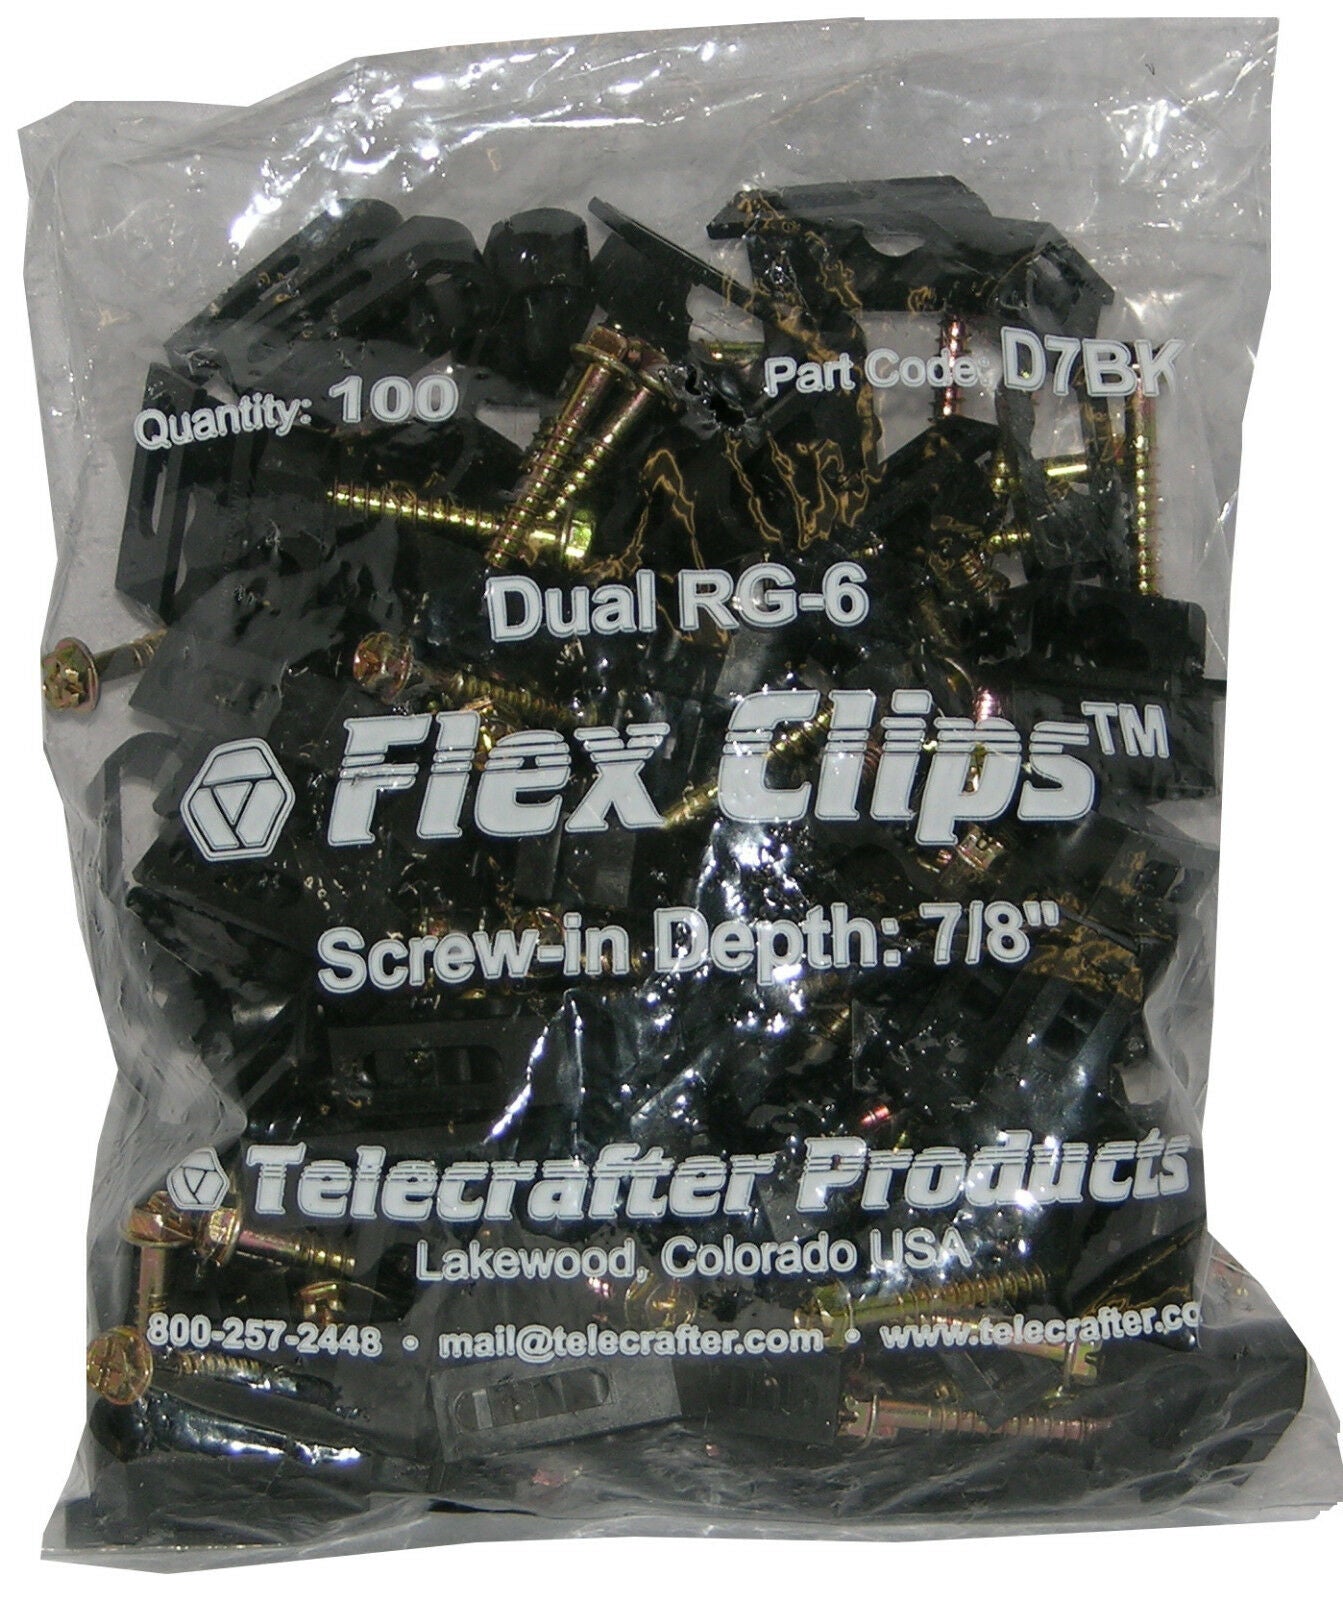 Telecrafter, Telecrafter D7BK, Flex Clips for dual RG-6 or RG-59 Coax cable, 7/8" screw, 100/pack